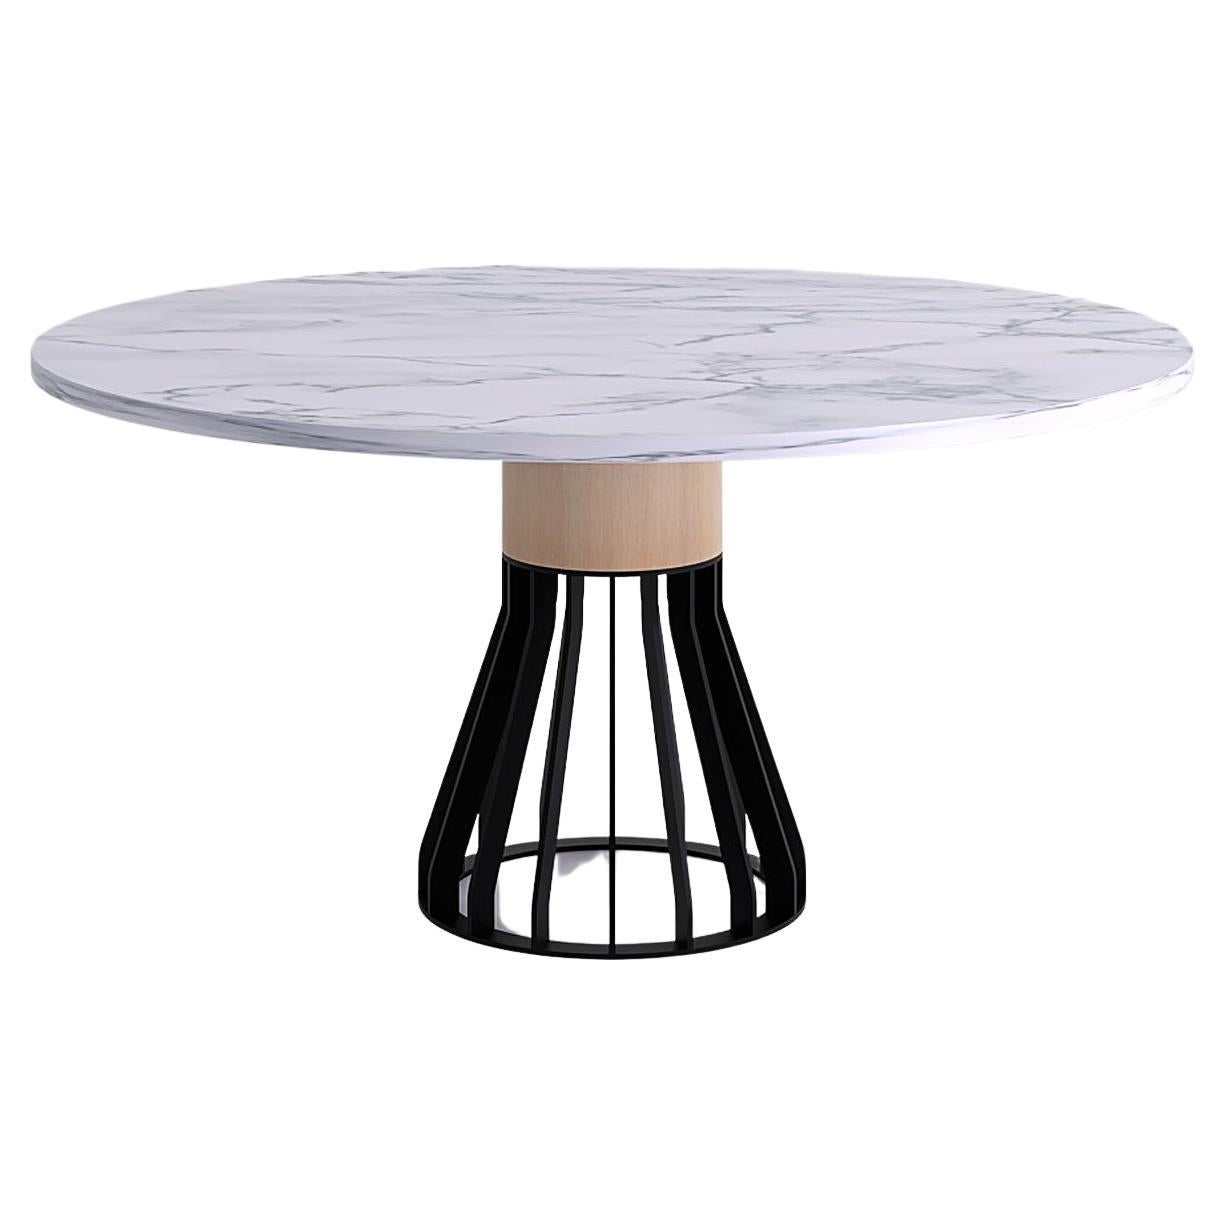 Mewoma Dining Table, Black Legs White Top by Jonah Takagi for La Chance For Sale